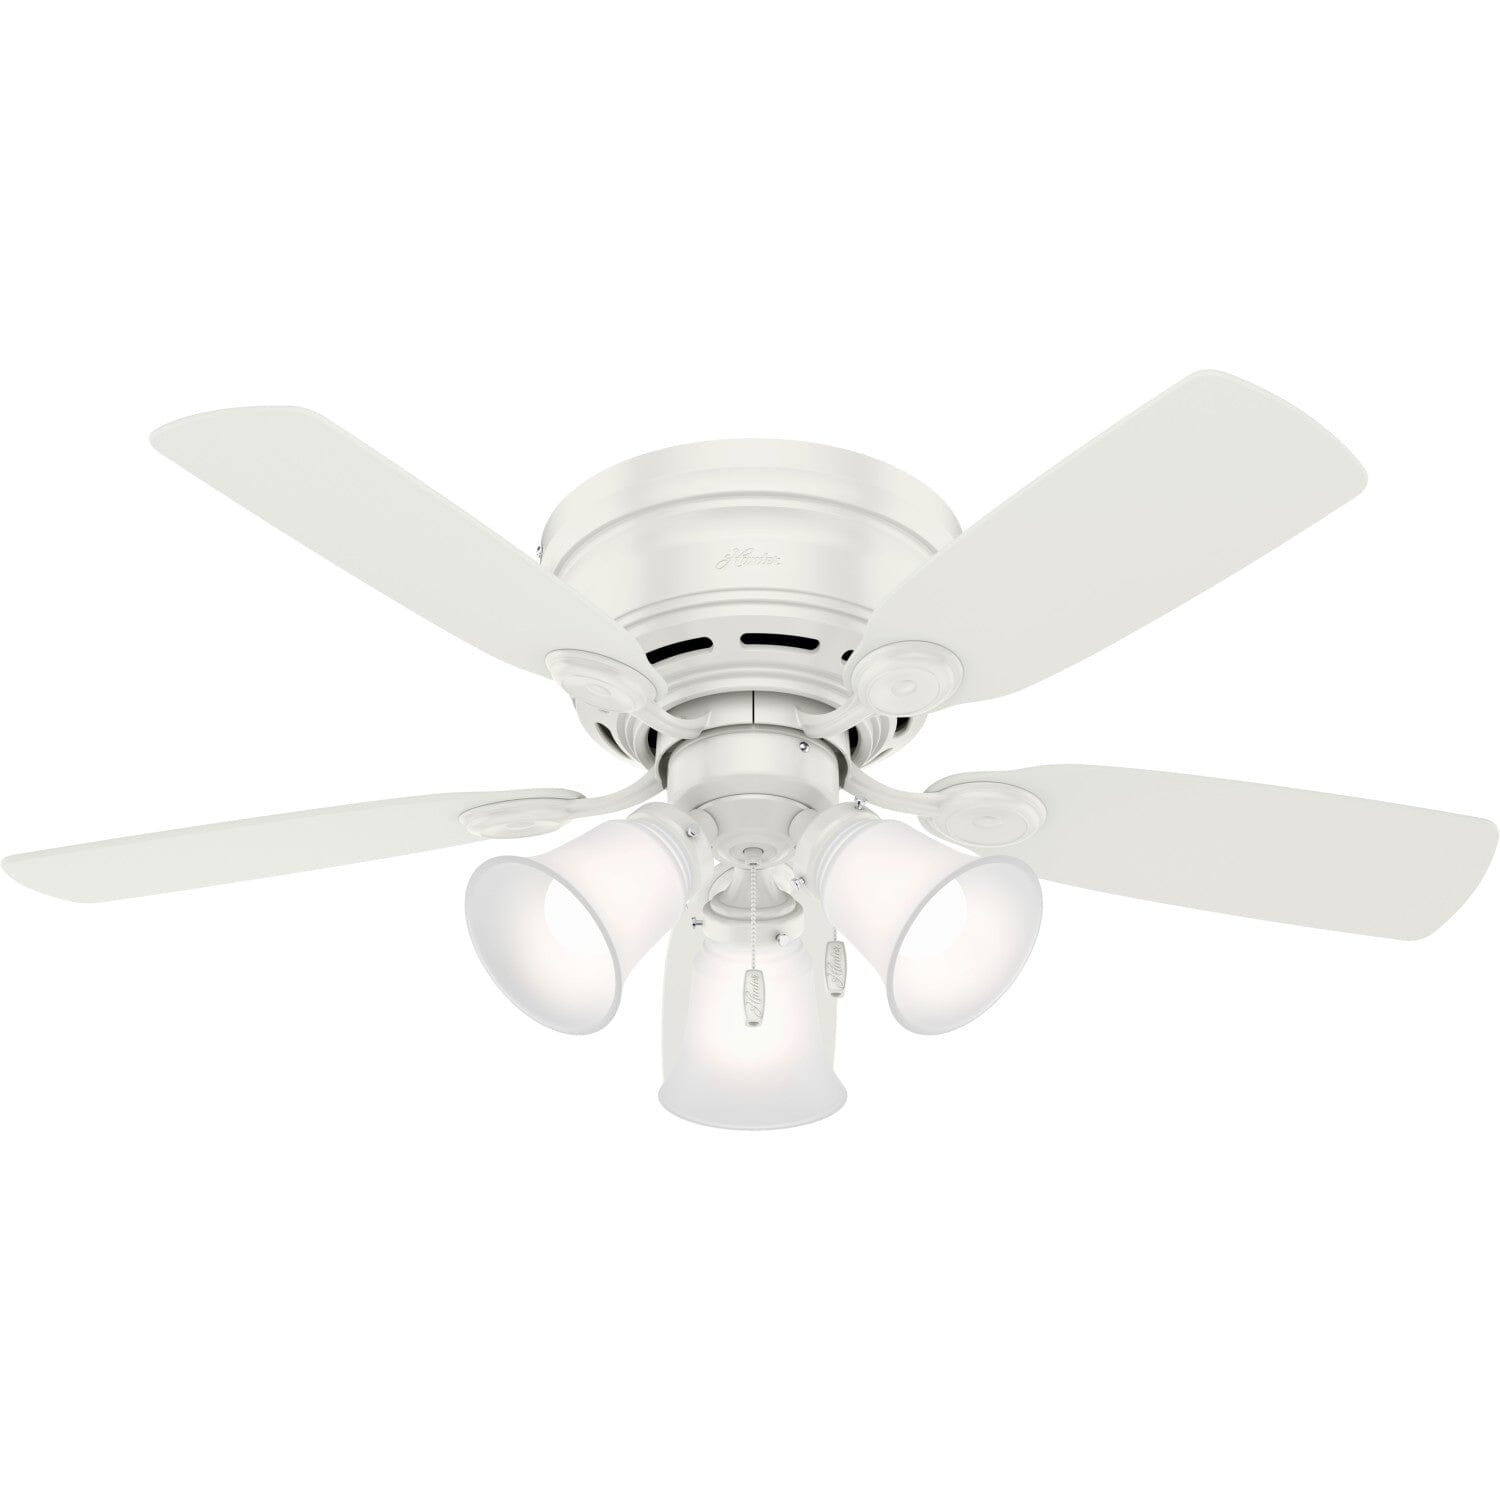 Low Profile With Led Light 42 In Ceiling Fan Hunter